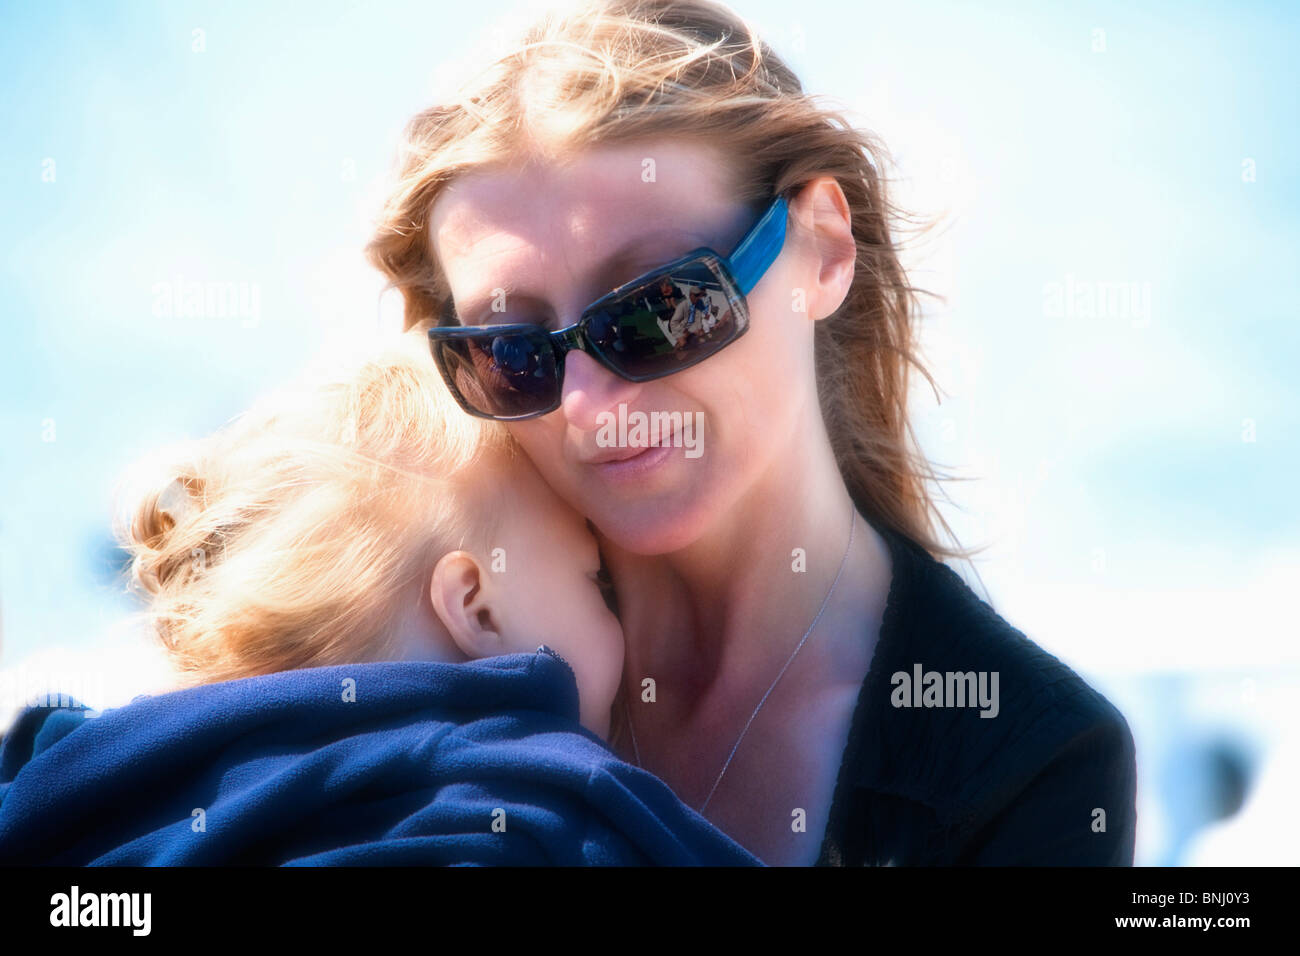 Woman 30 child affection nearness embrace mother sunglasses portrait tiredly Outside Outdoors baby Stock Photo